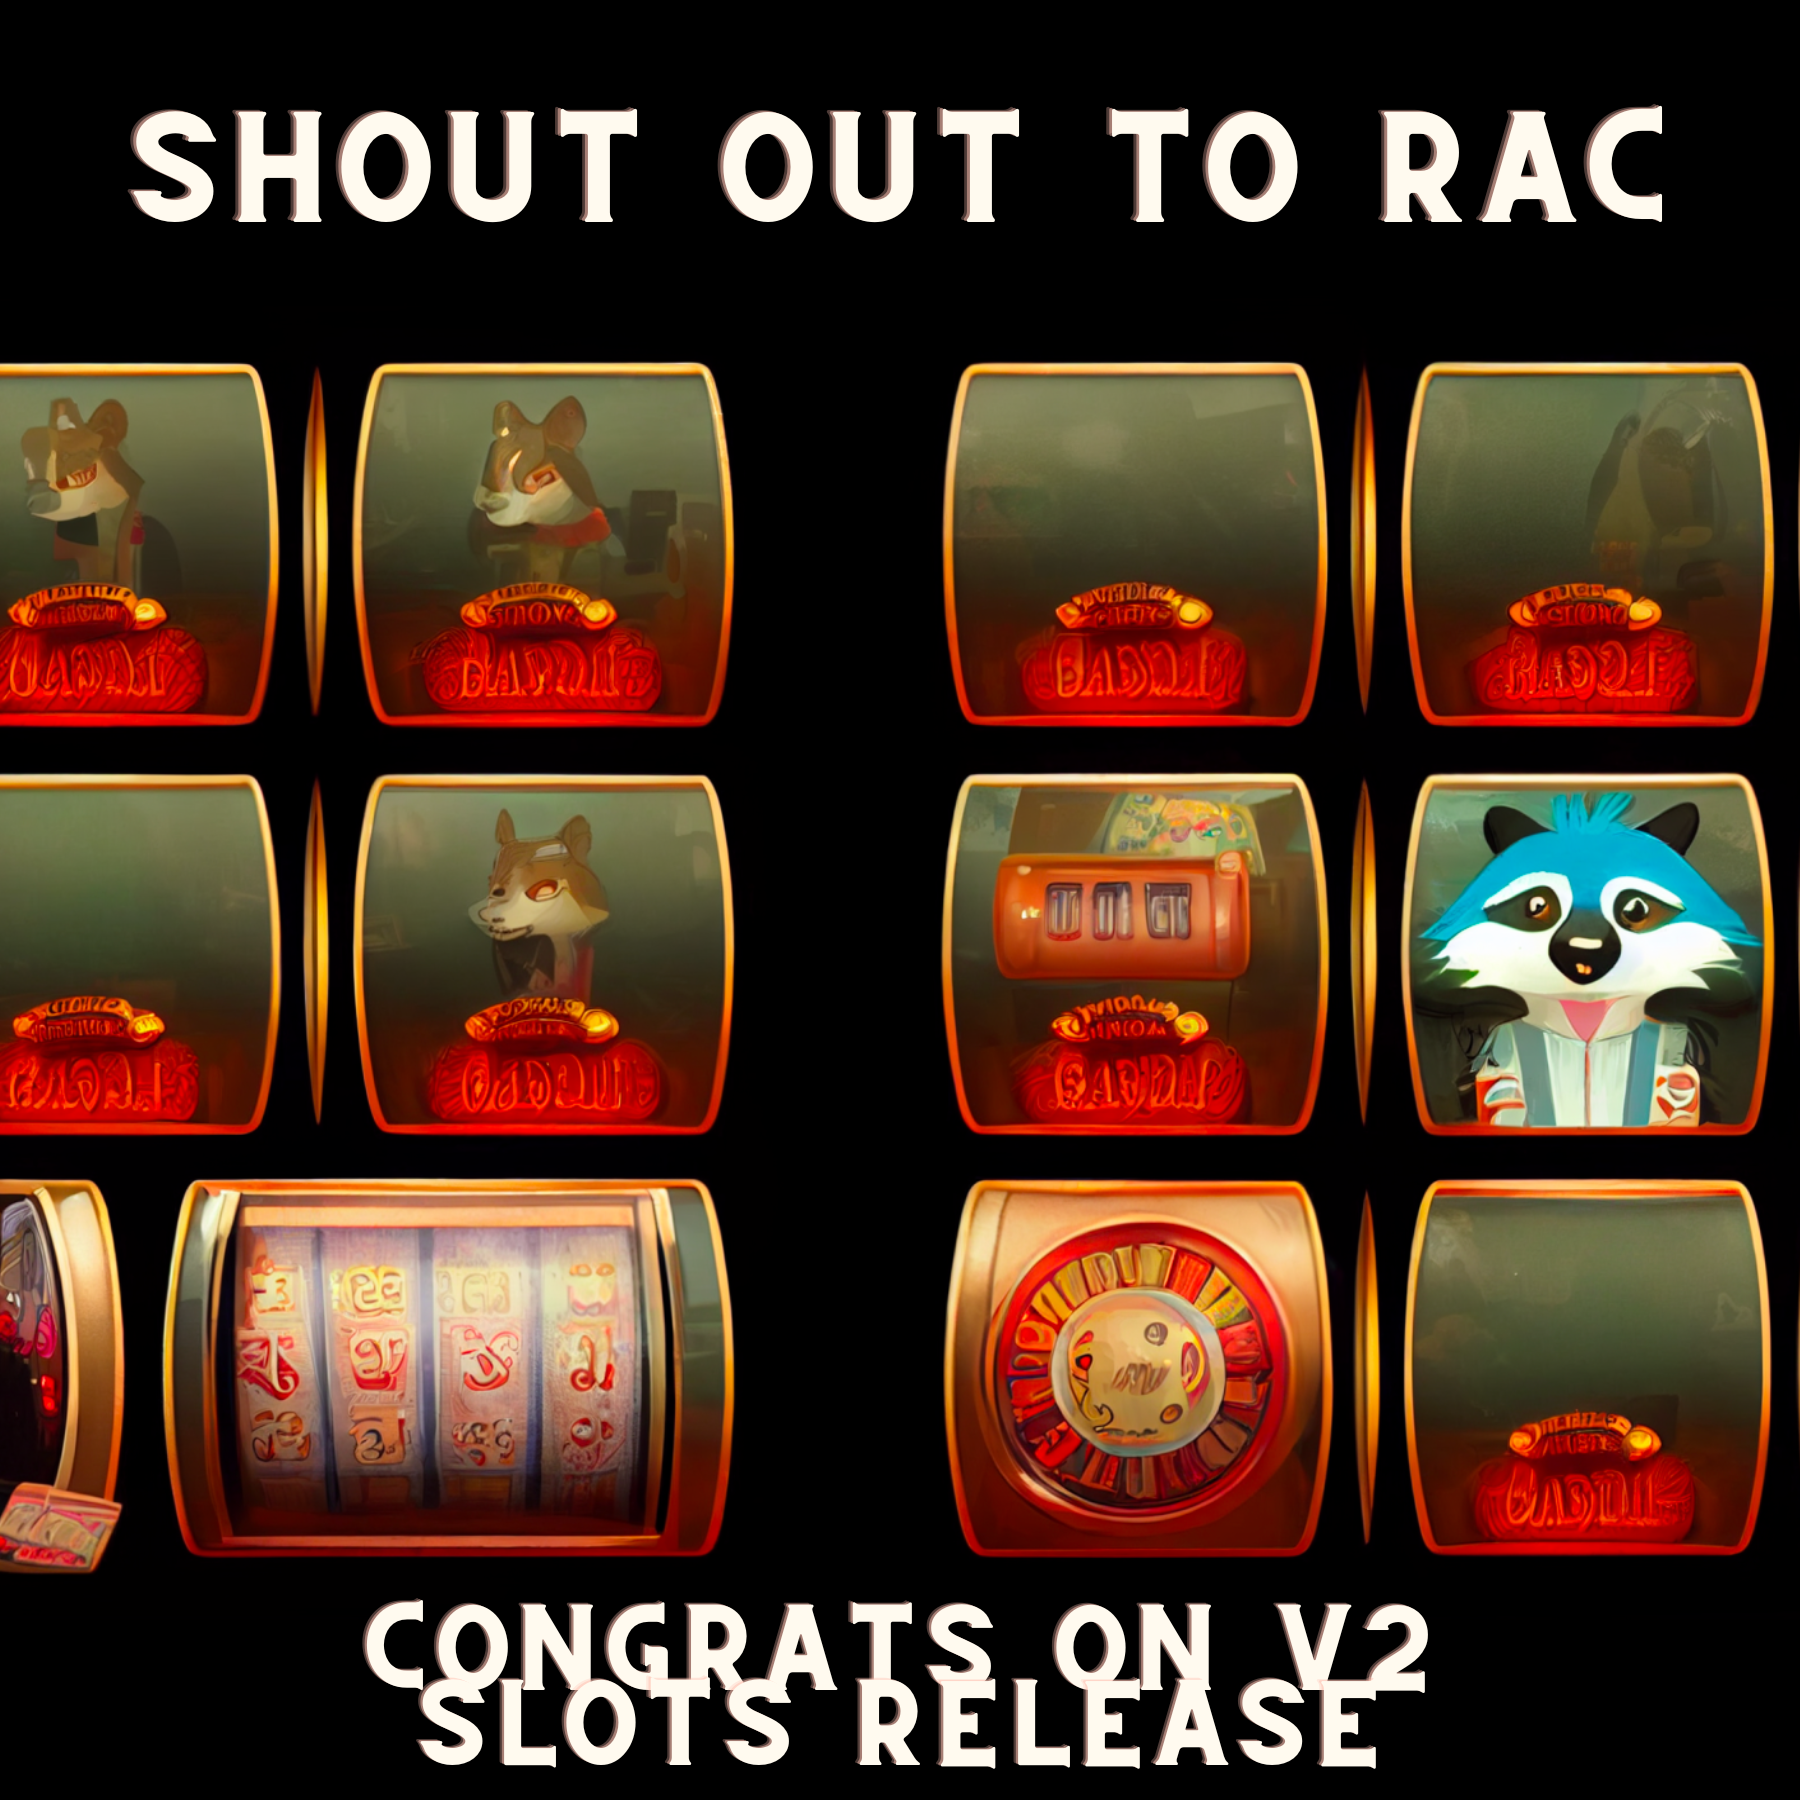 RAC Shout out #005.png